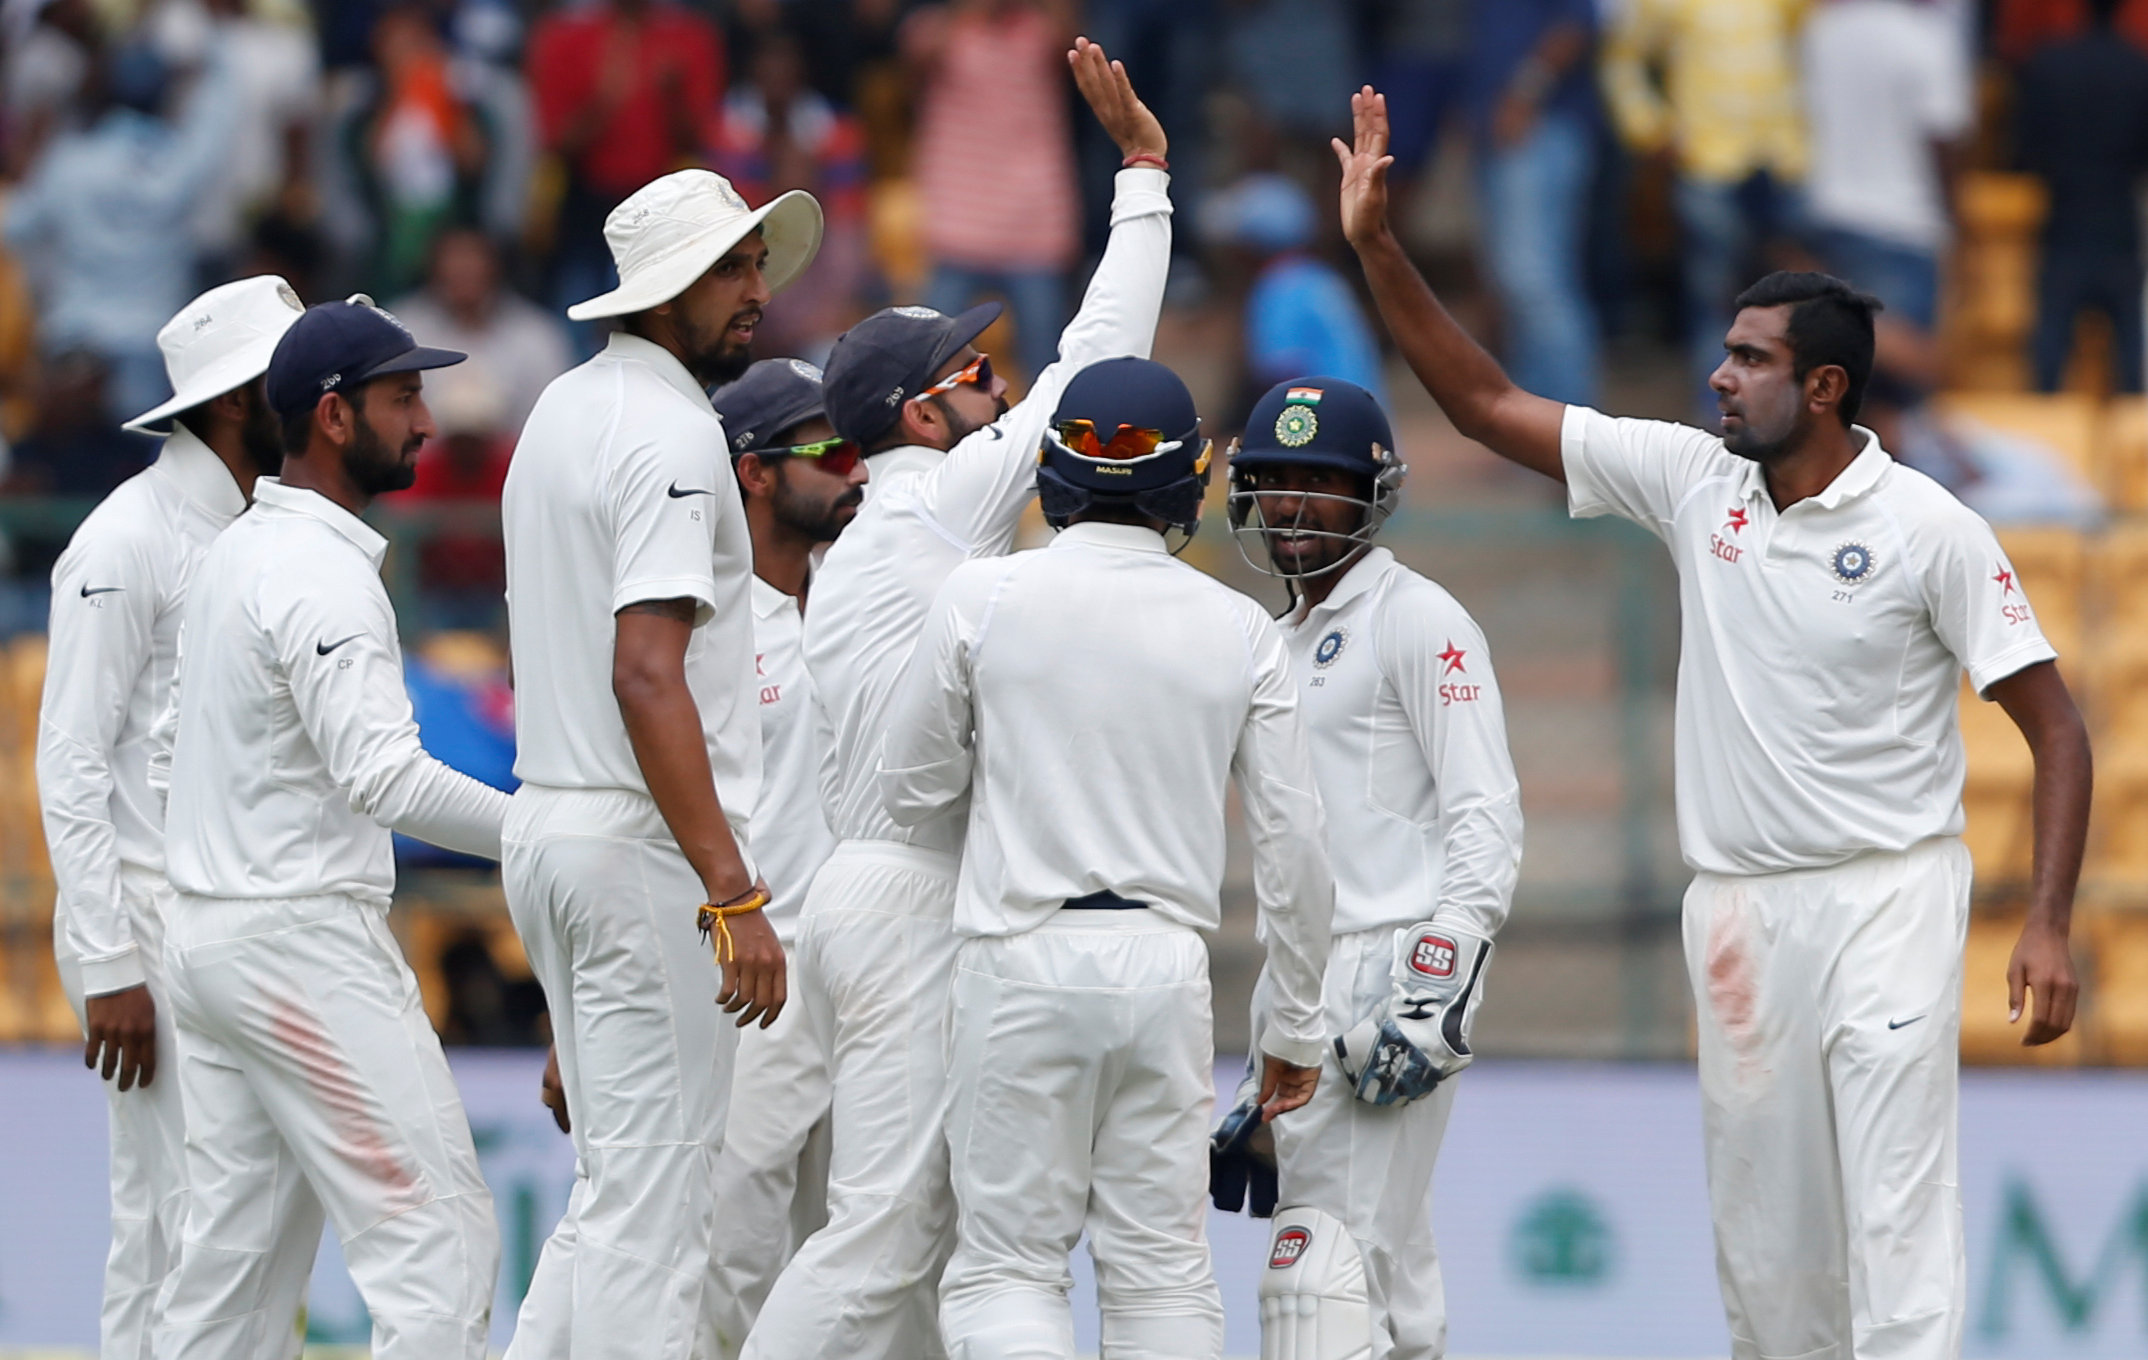 Cricket: Six-wicket Ashwin bowls India to victory over Australia